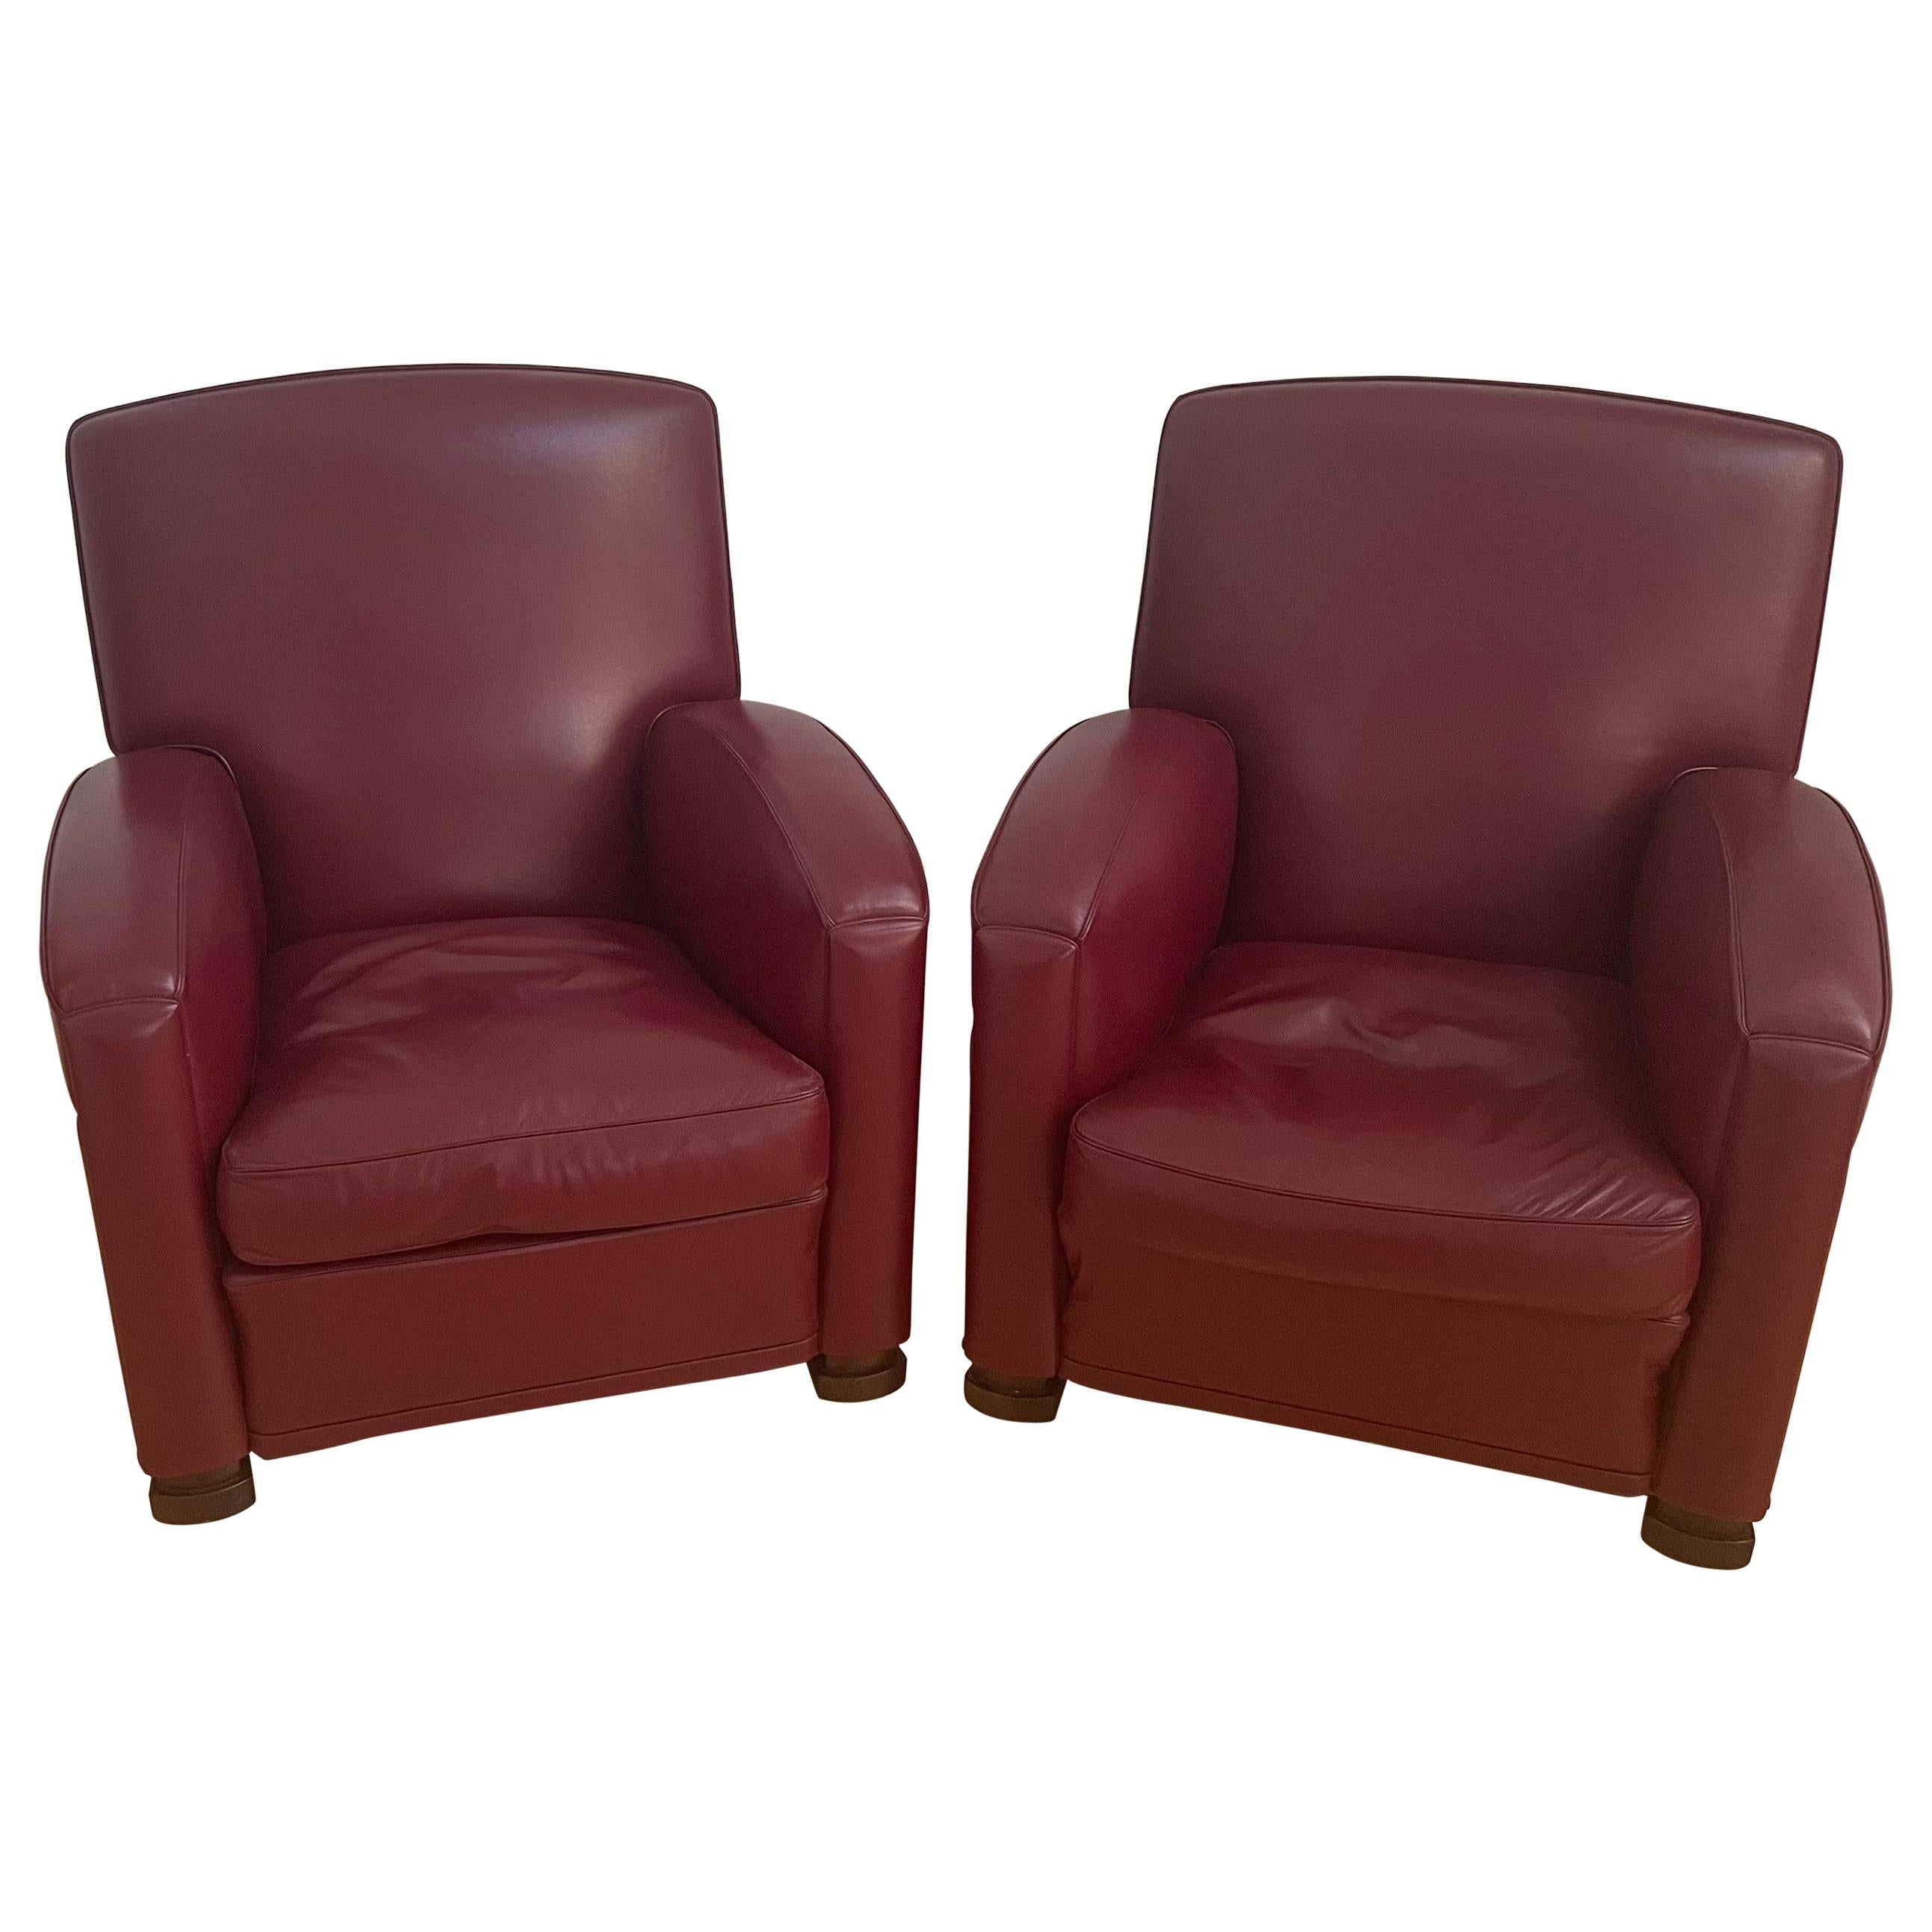 Pair of Striking "Tabarin" Chairs in Red Bordeaux Leather by Poltrona Frau